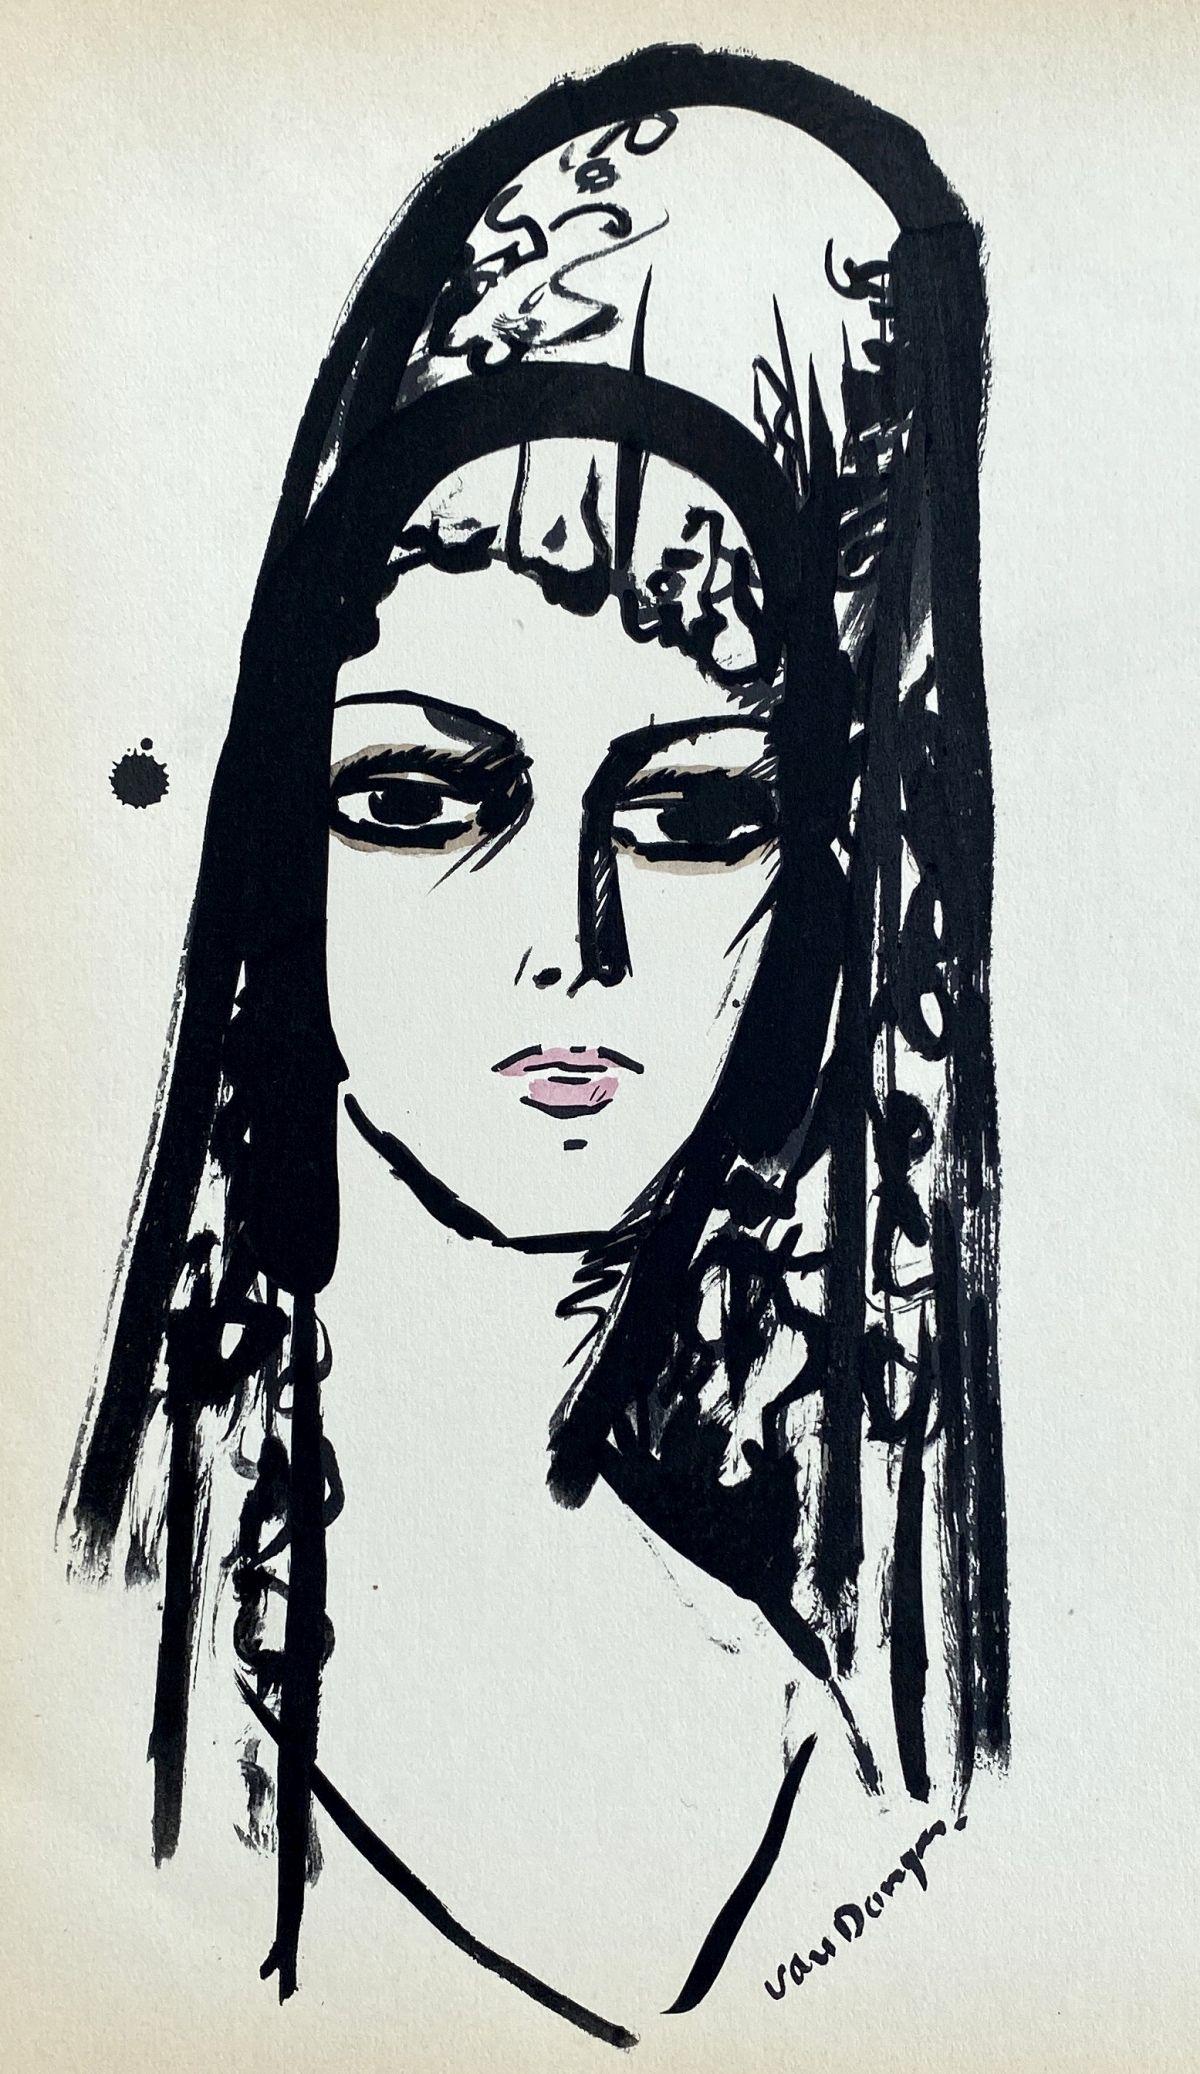 Spanish Woman - Lithograph & Stencil - Plate Signed - Juffermans #JB5 - Print by Kees van Dongen